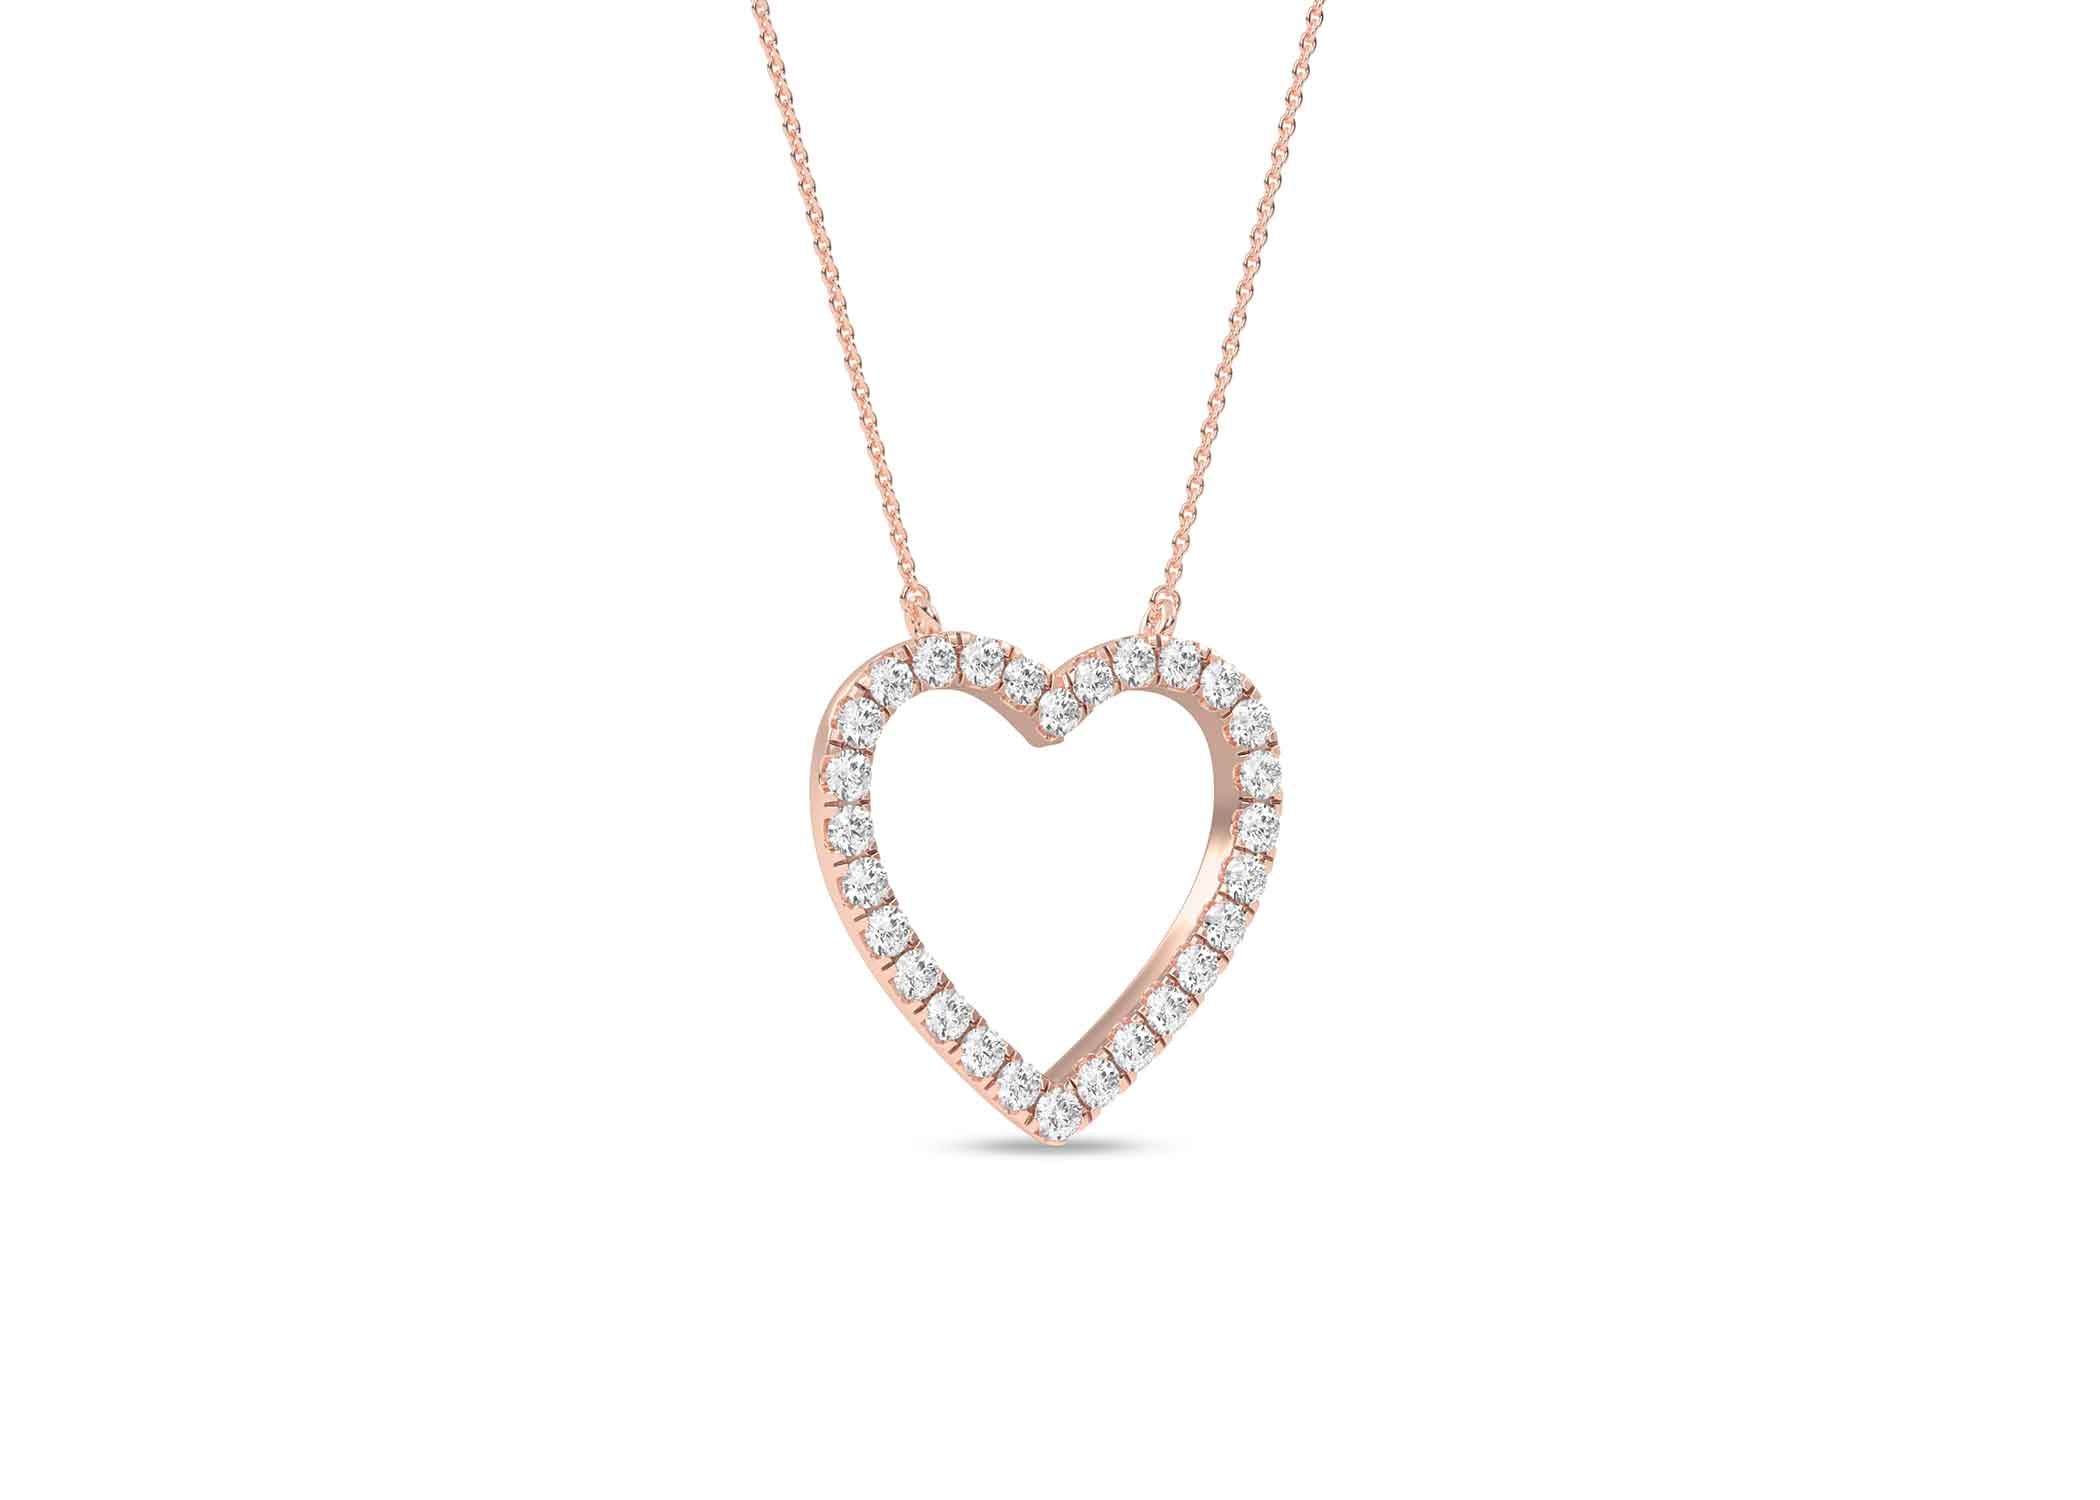 Heart Silhouette Necklace - Necklace 